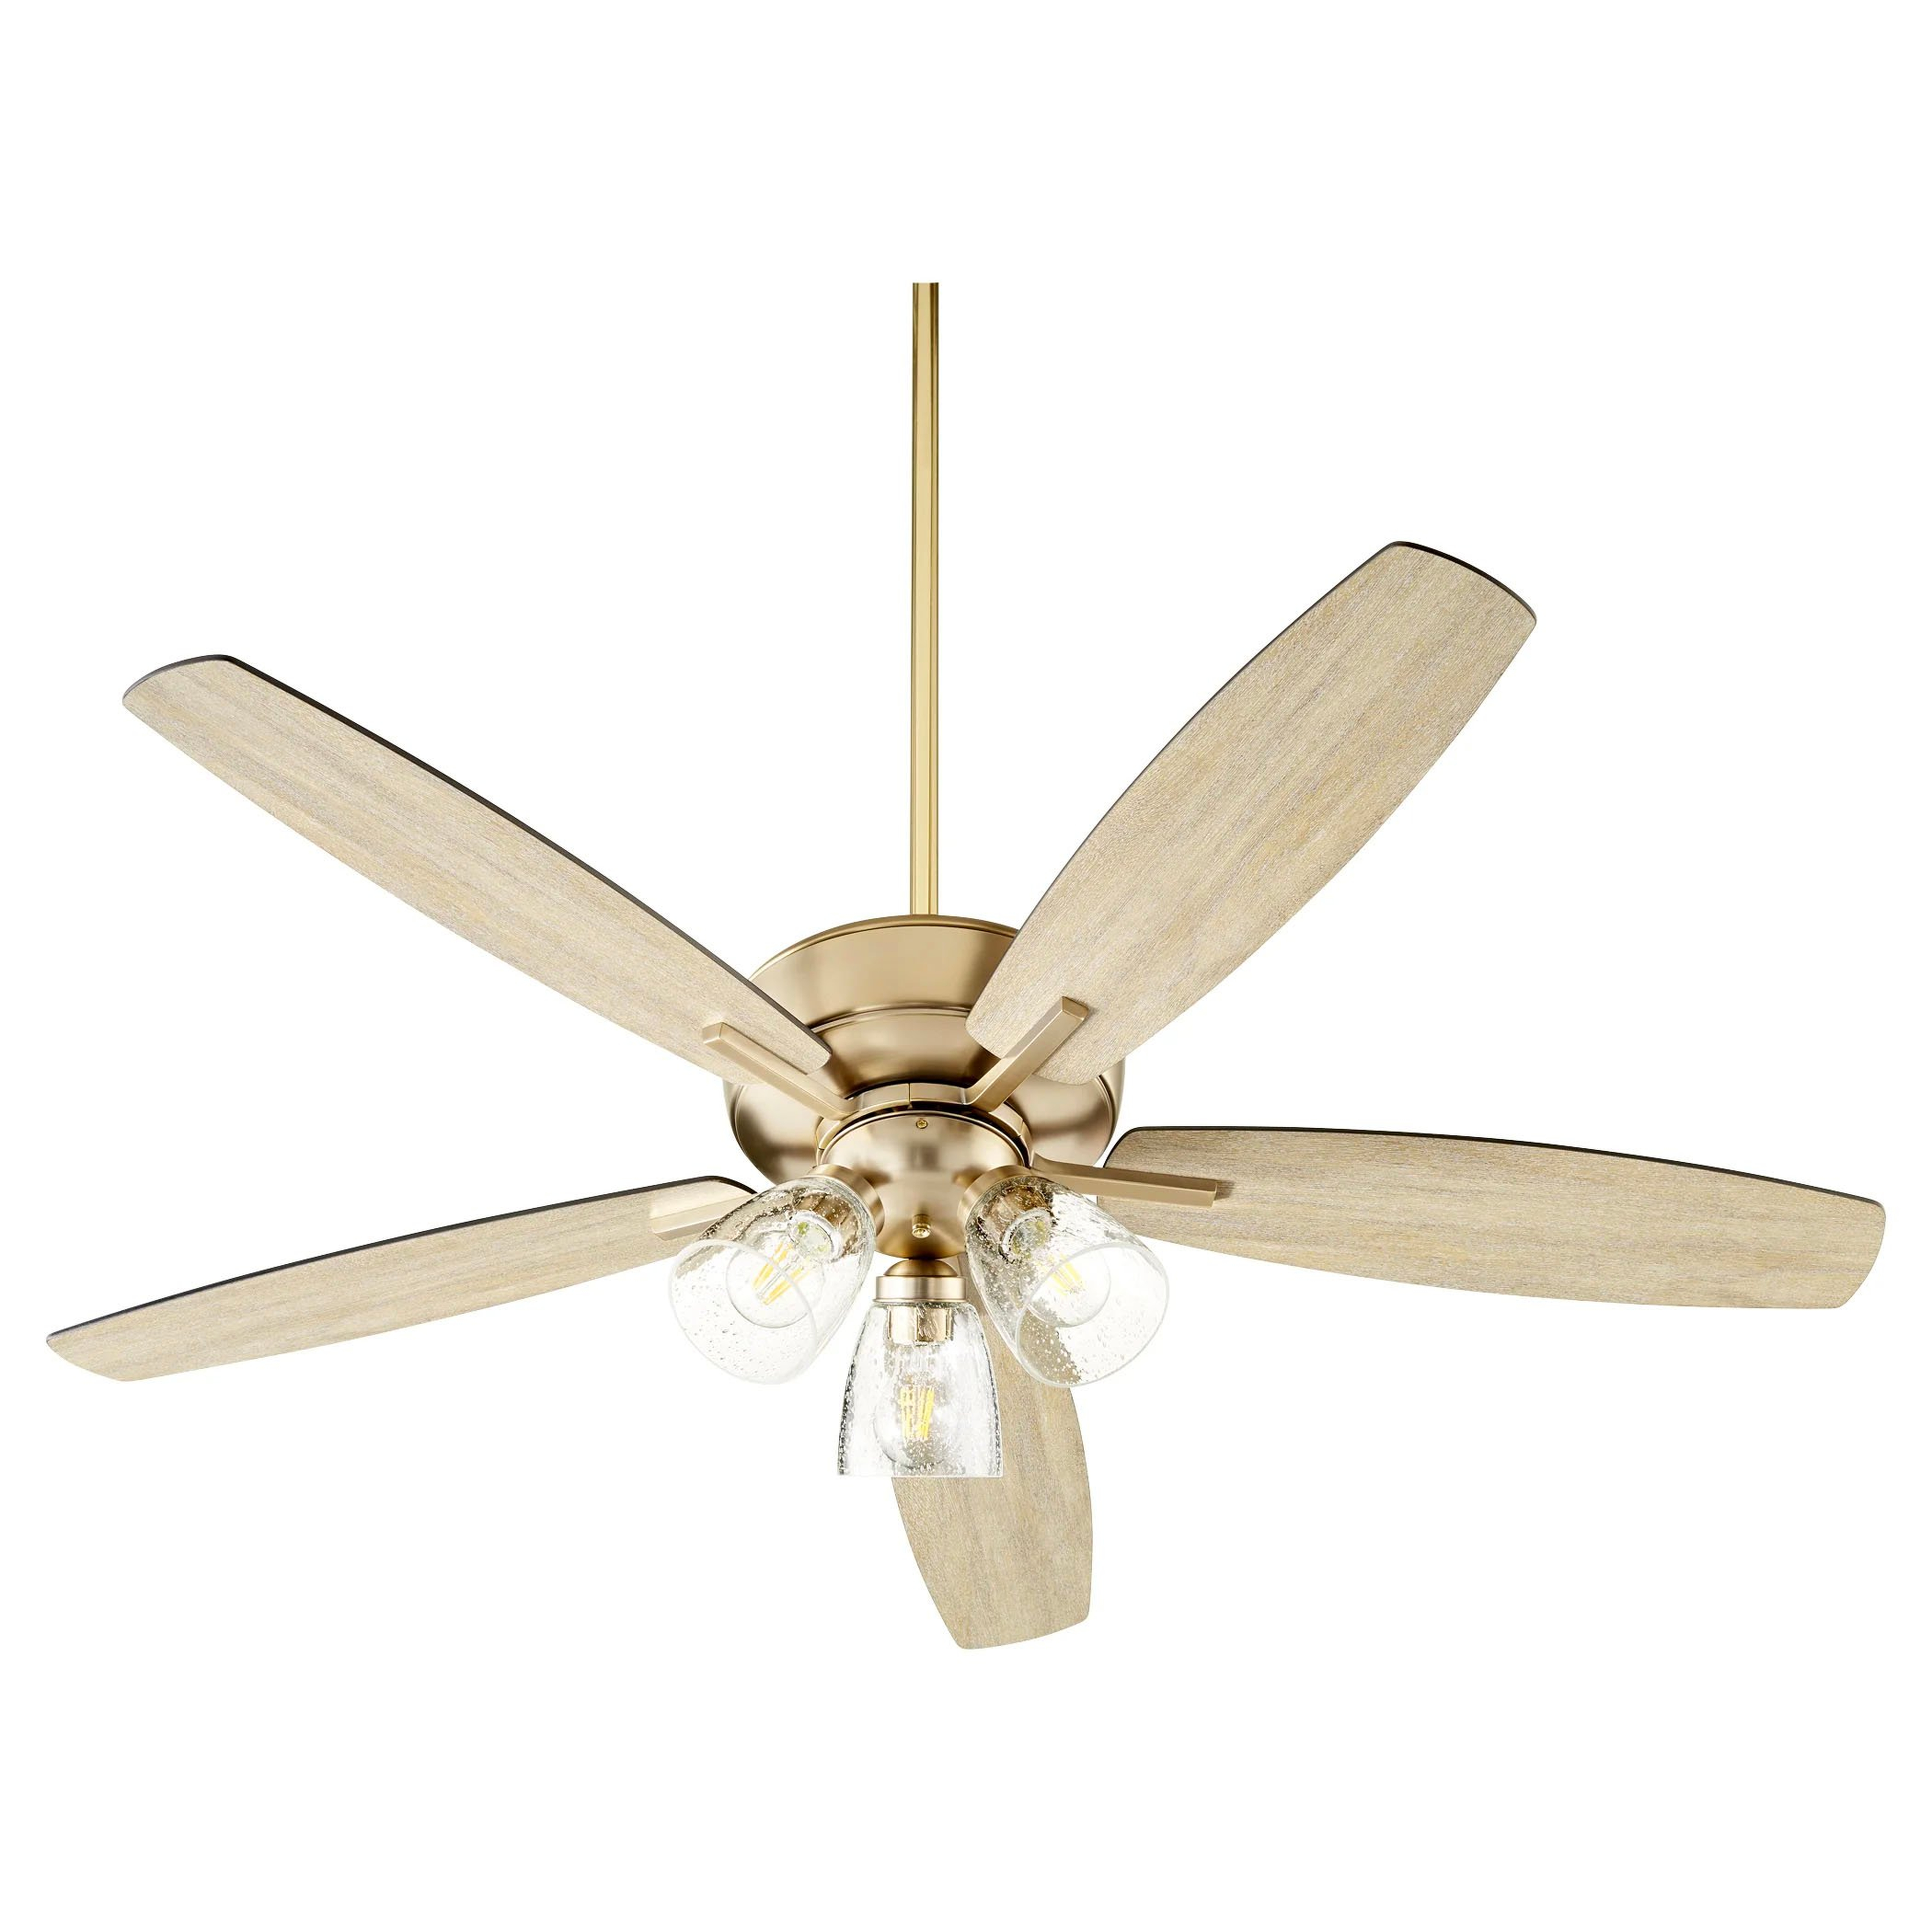 52'' Aromas 5 - Blade Standard Ceiling Fan with Pull Chain and Light Kit Included - Wayfair